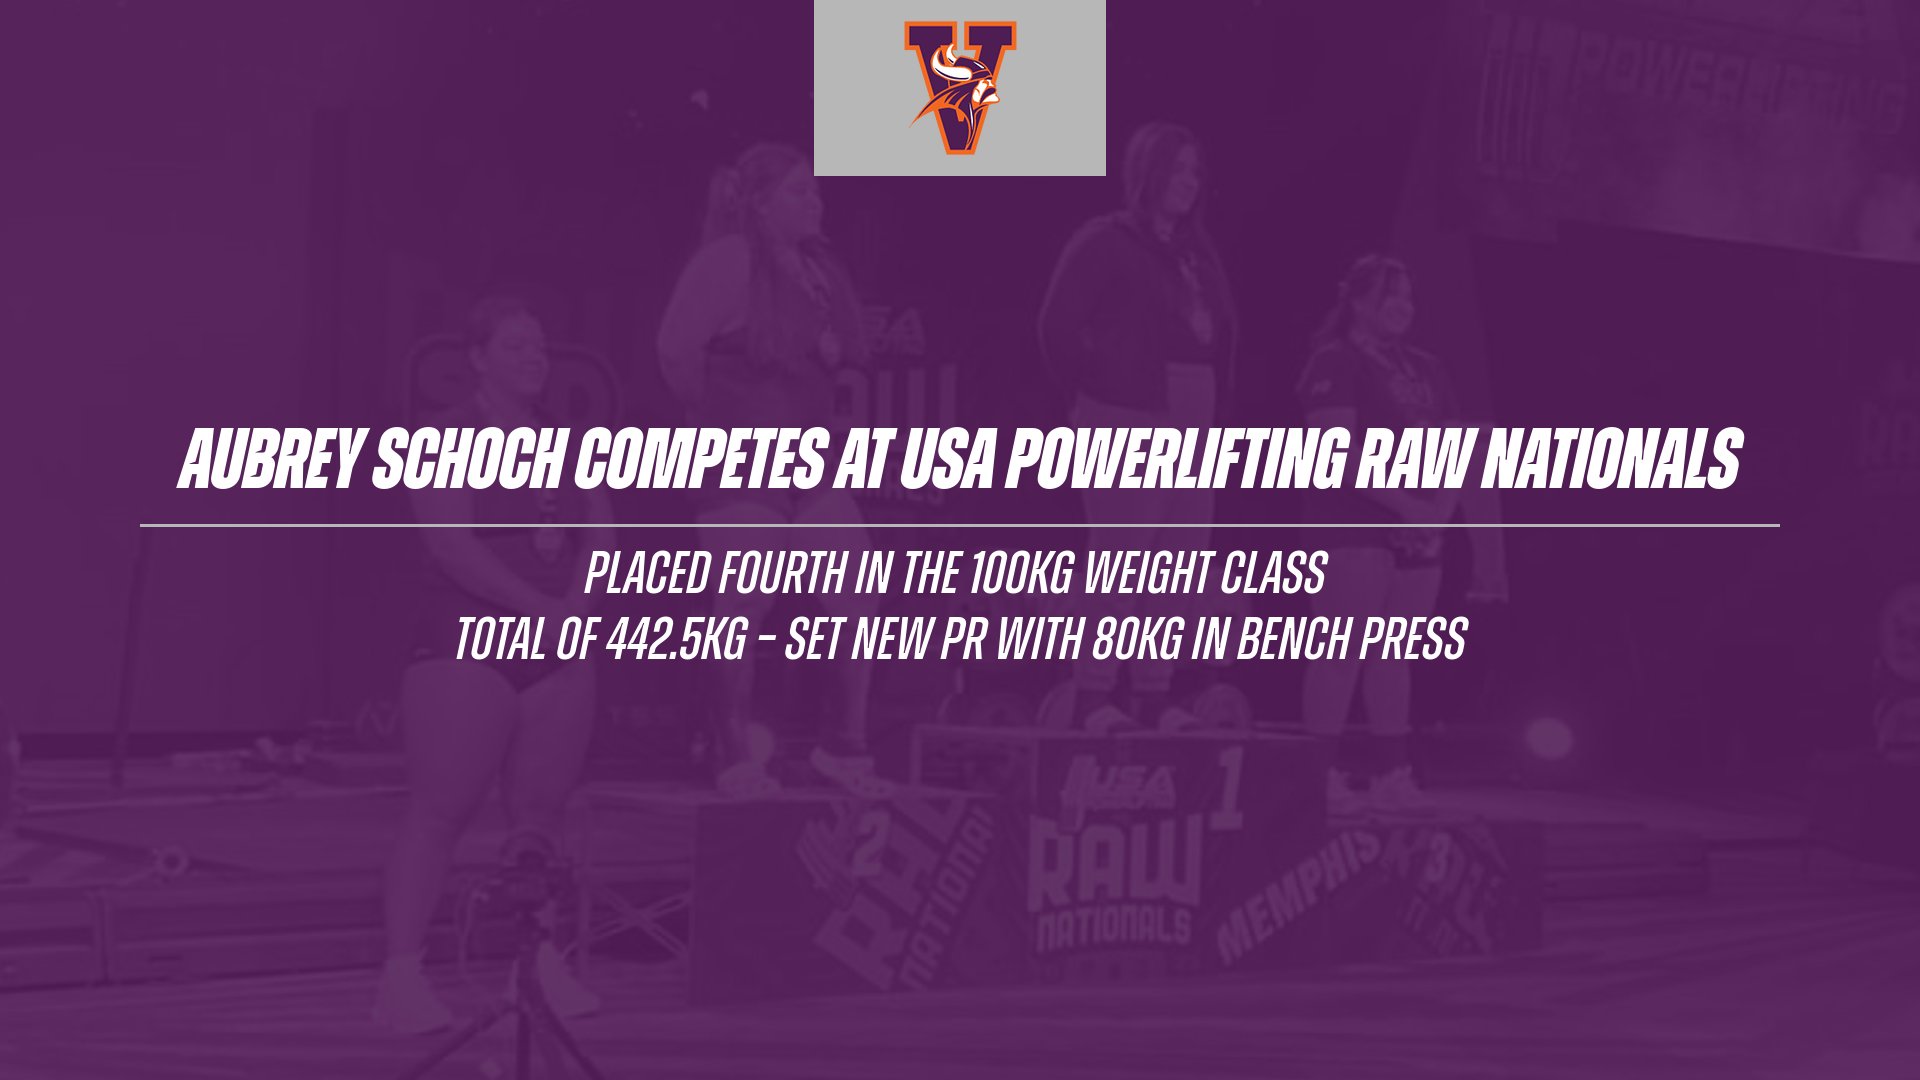 Powerlifter Competes at USA Powerlifting RAW Nationals